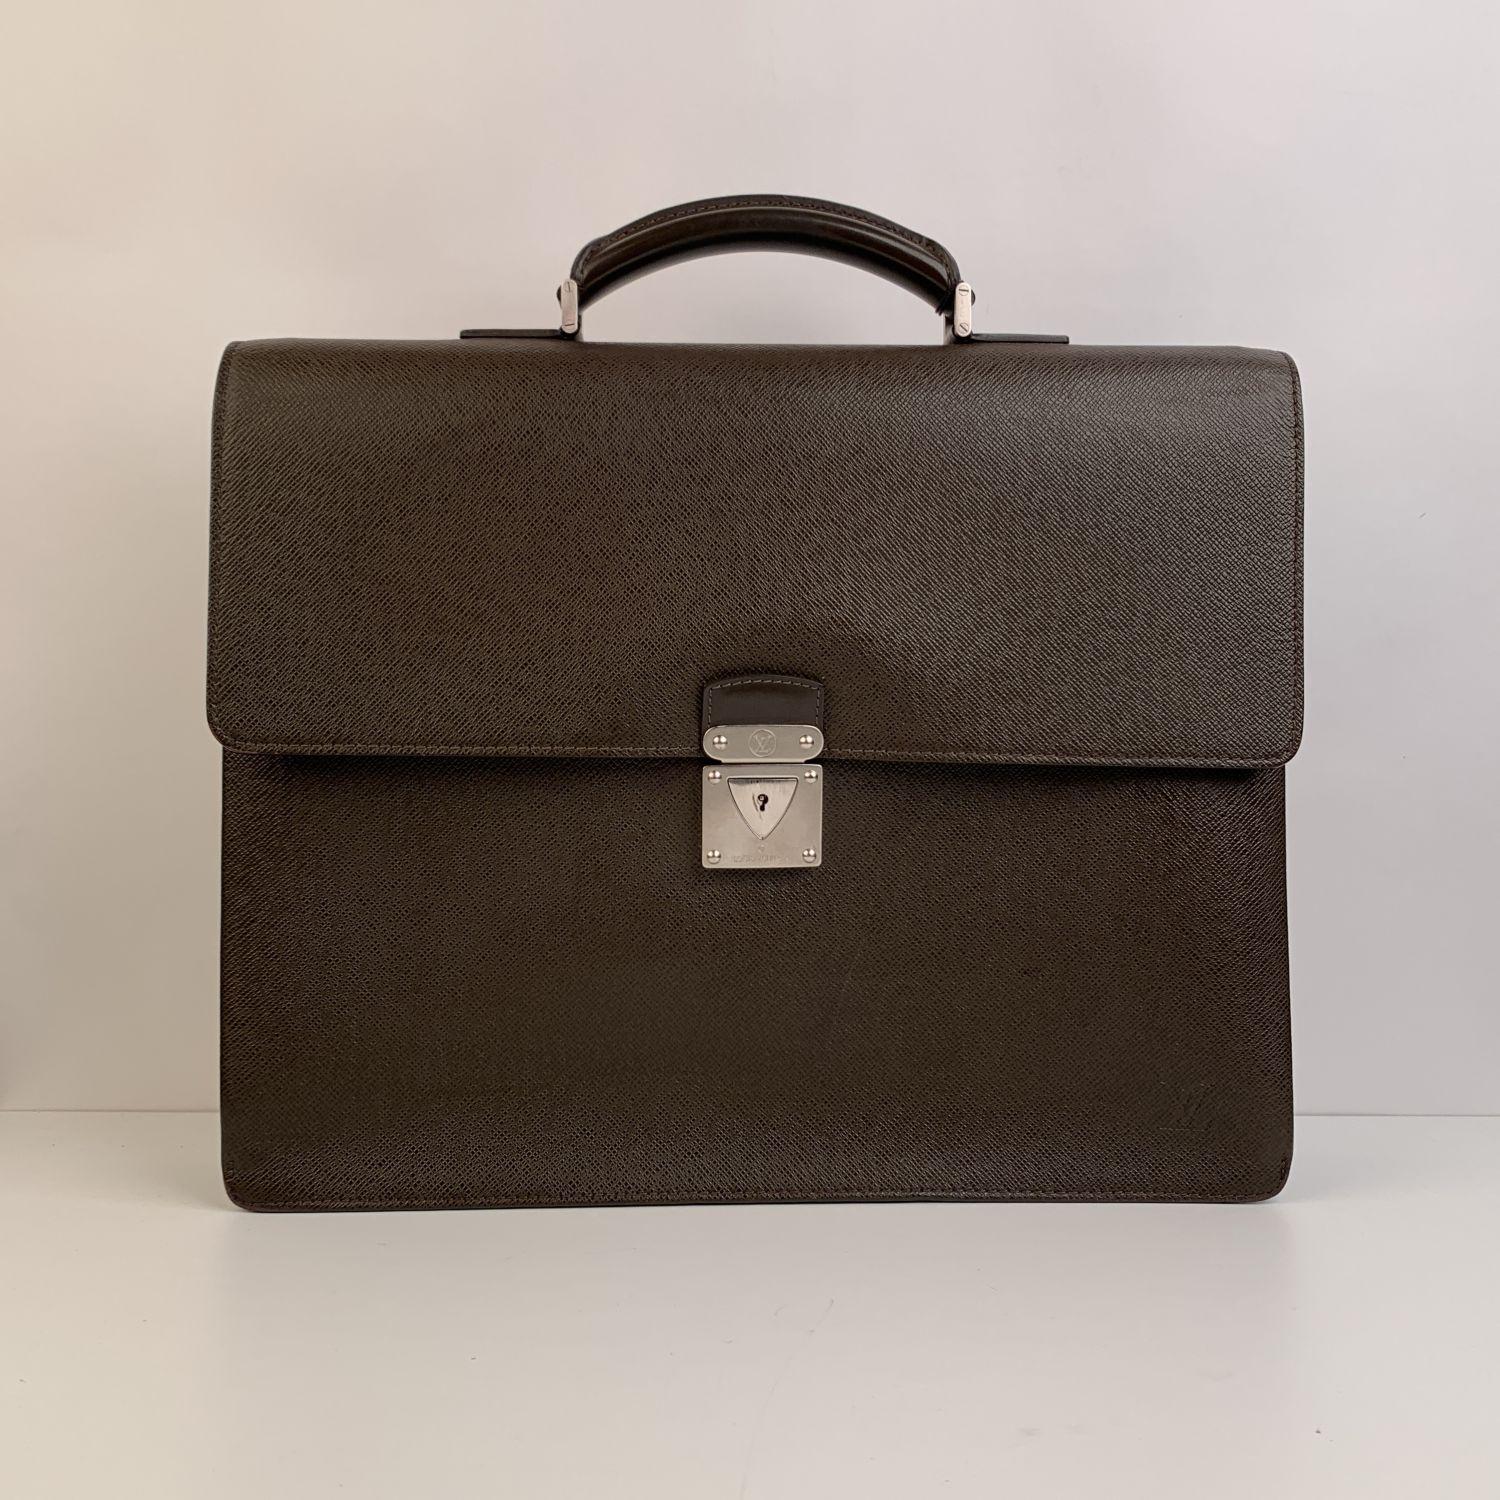 Classic Louis Vuitton Brown Taiga Leather Robusto 2 Compartments Briefcase Bag. Silver metal hardware. Flap closure with press lock closure on the front (key included). Exterior flat pocket on reverse. Fabric lining. The inside features 2 main